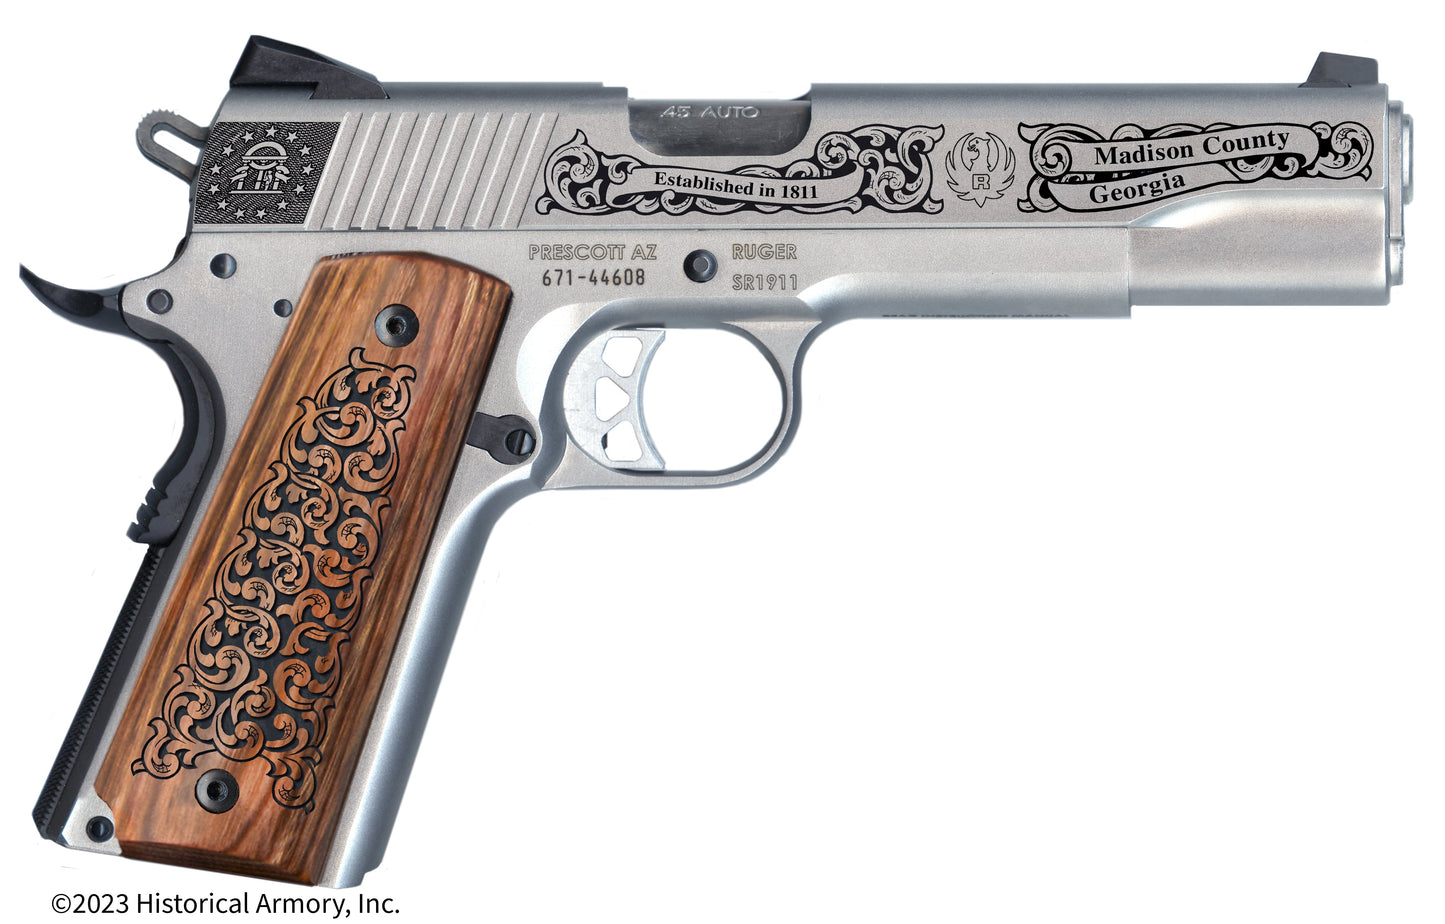 Madison County Georgia Engraved .45 Auto Ruger 1911